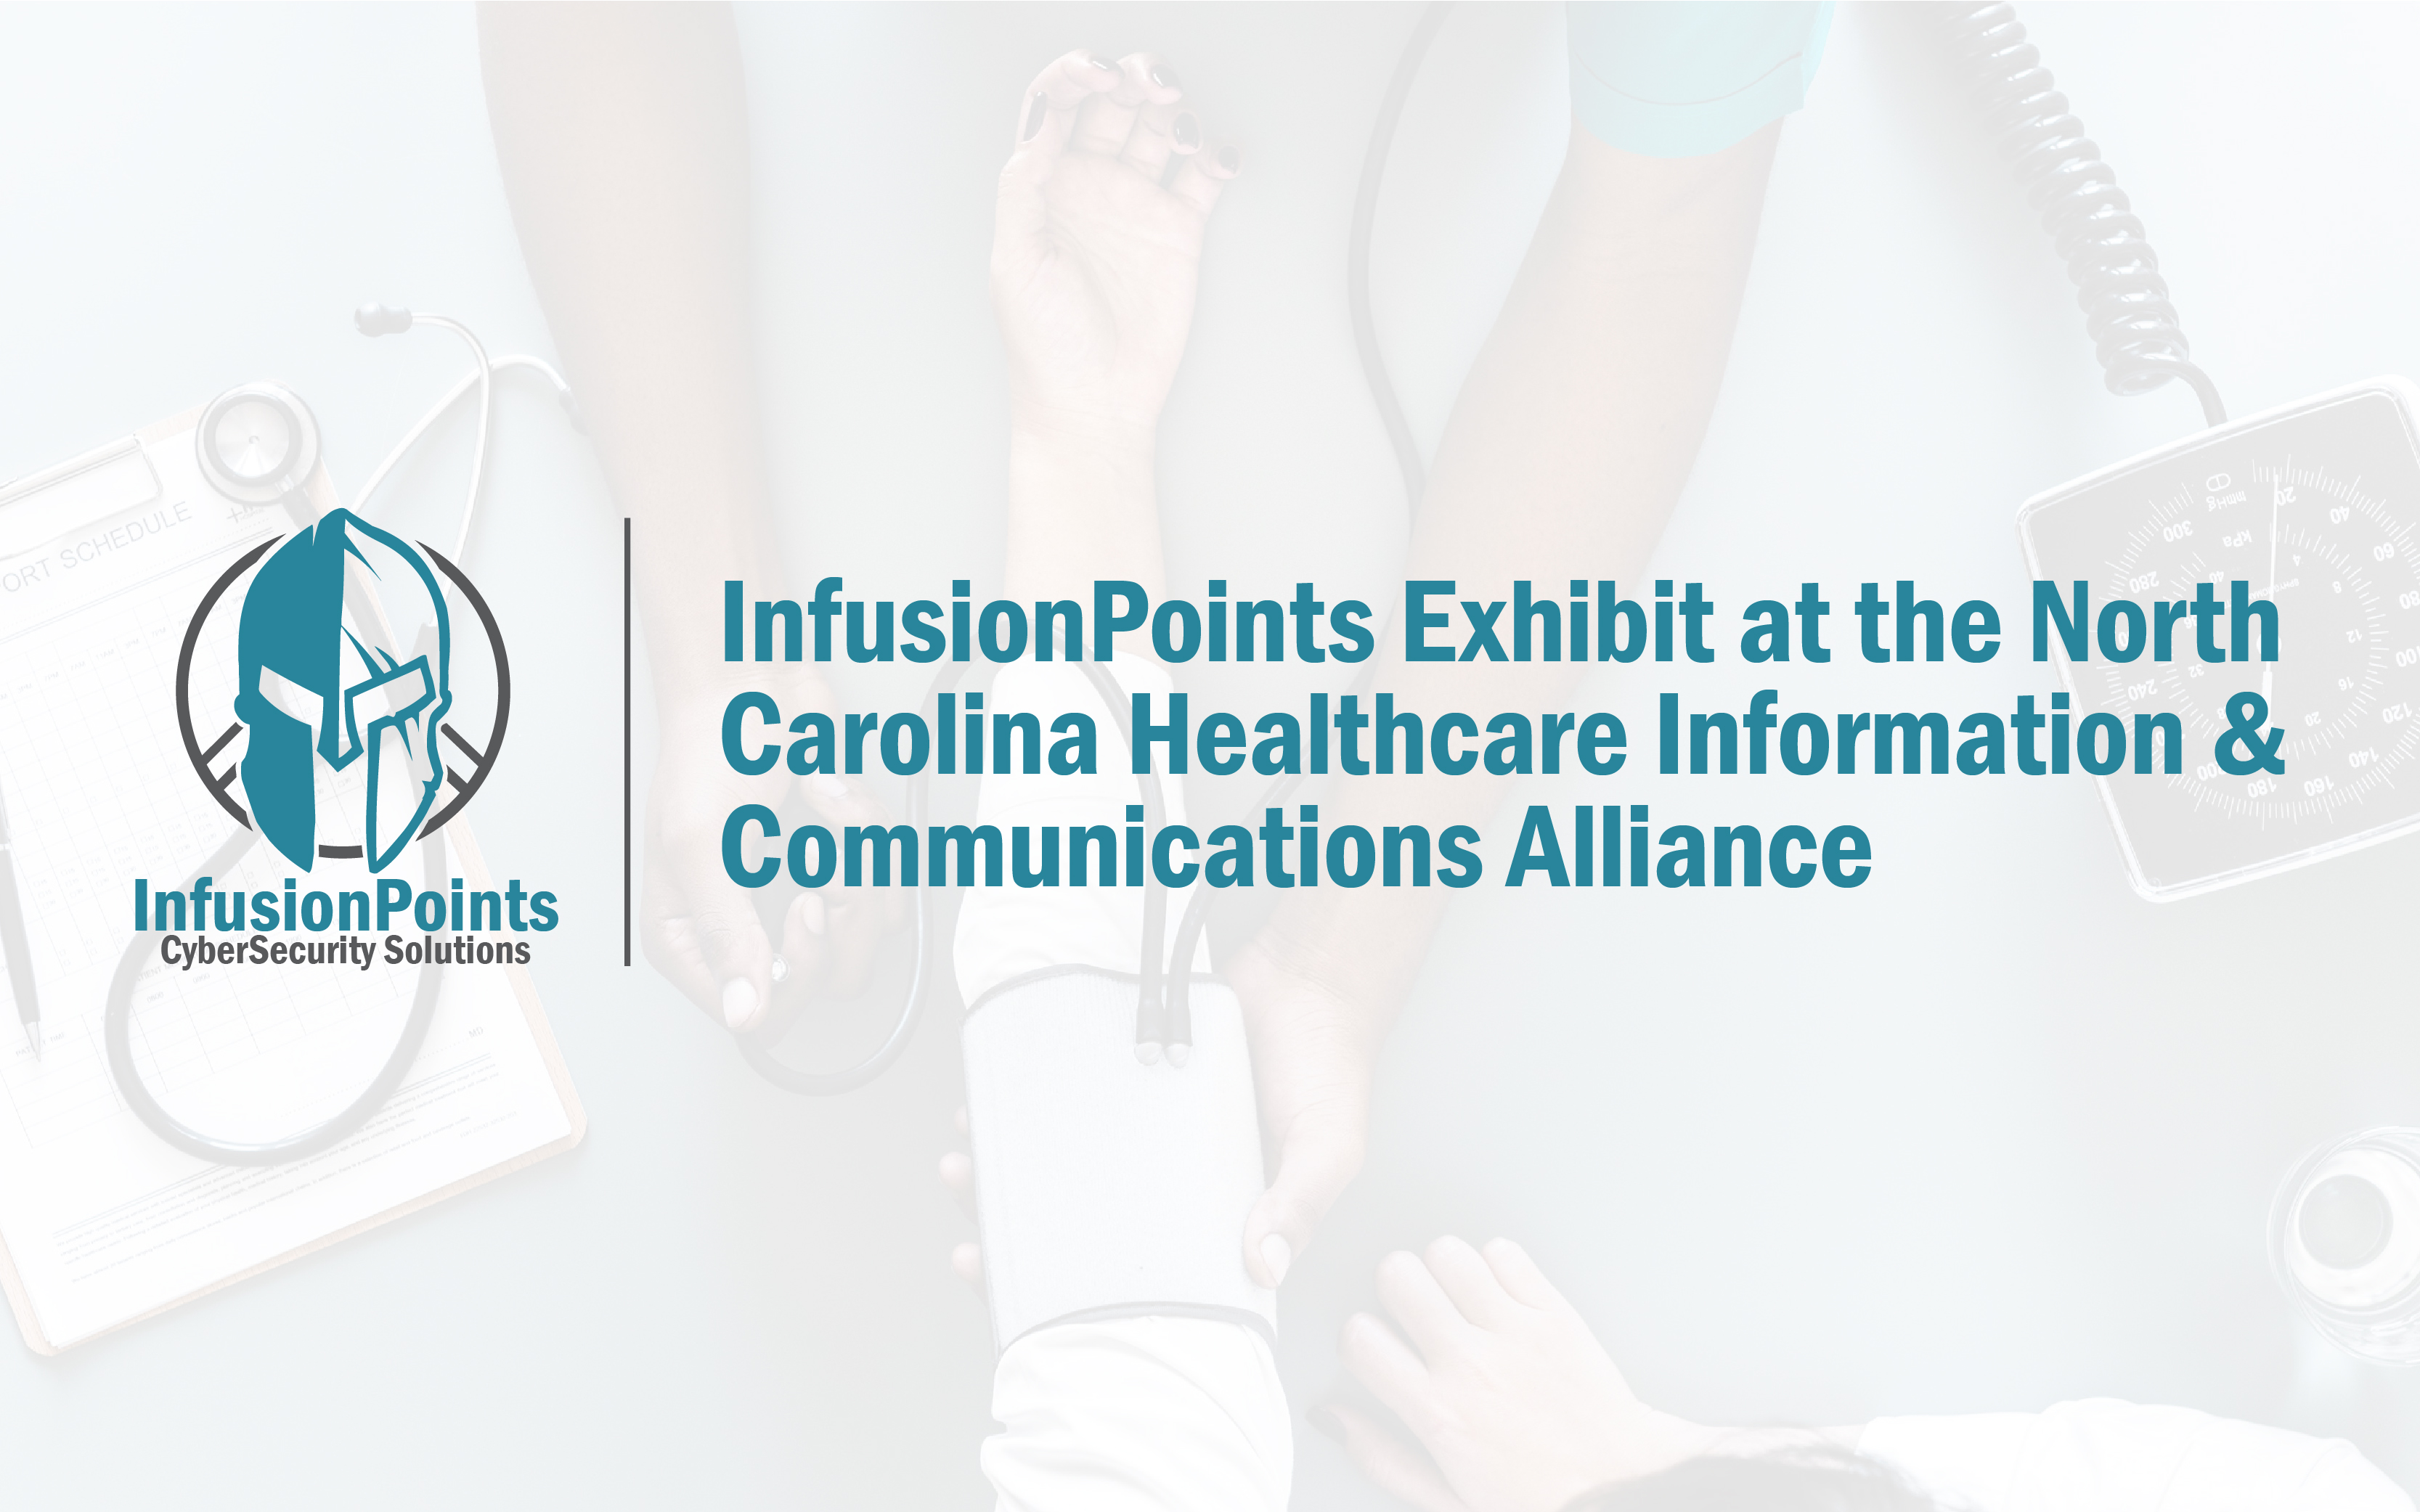 InfusionPoints, LLC to Exhibit at the NCHICA 24th Annual Conference in Charlotte, NC (October 8-9, 2018)